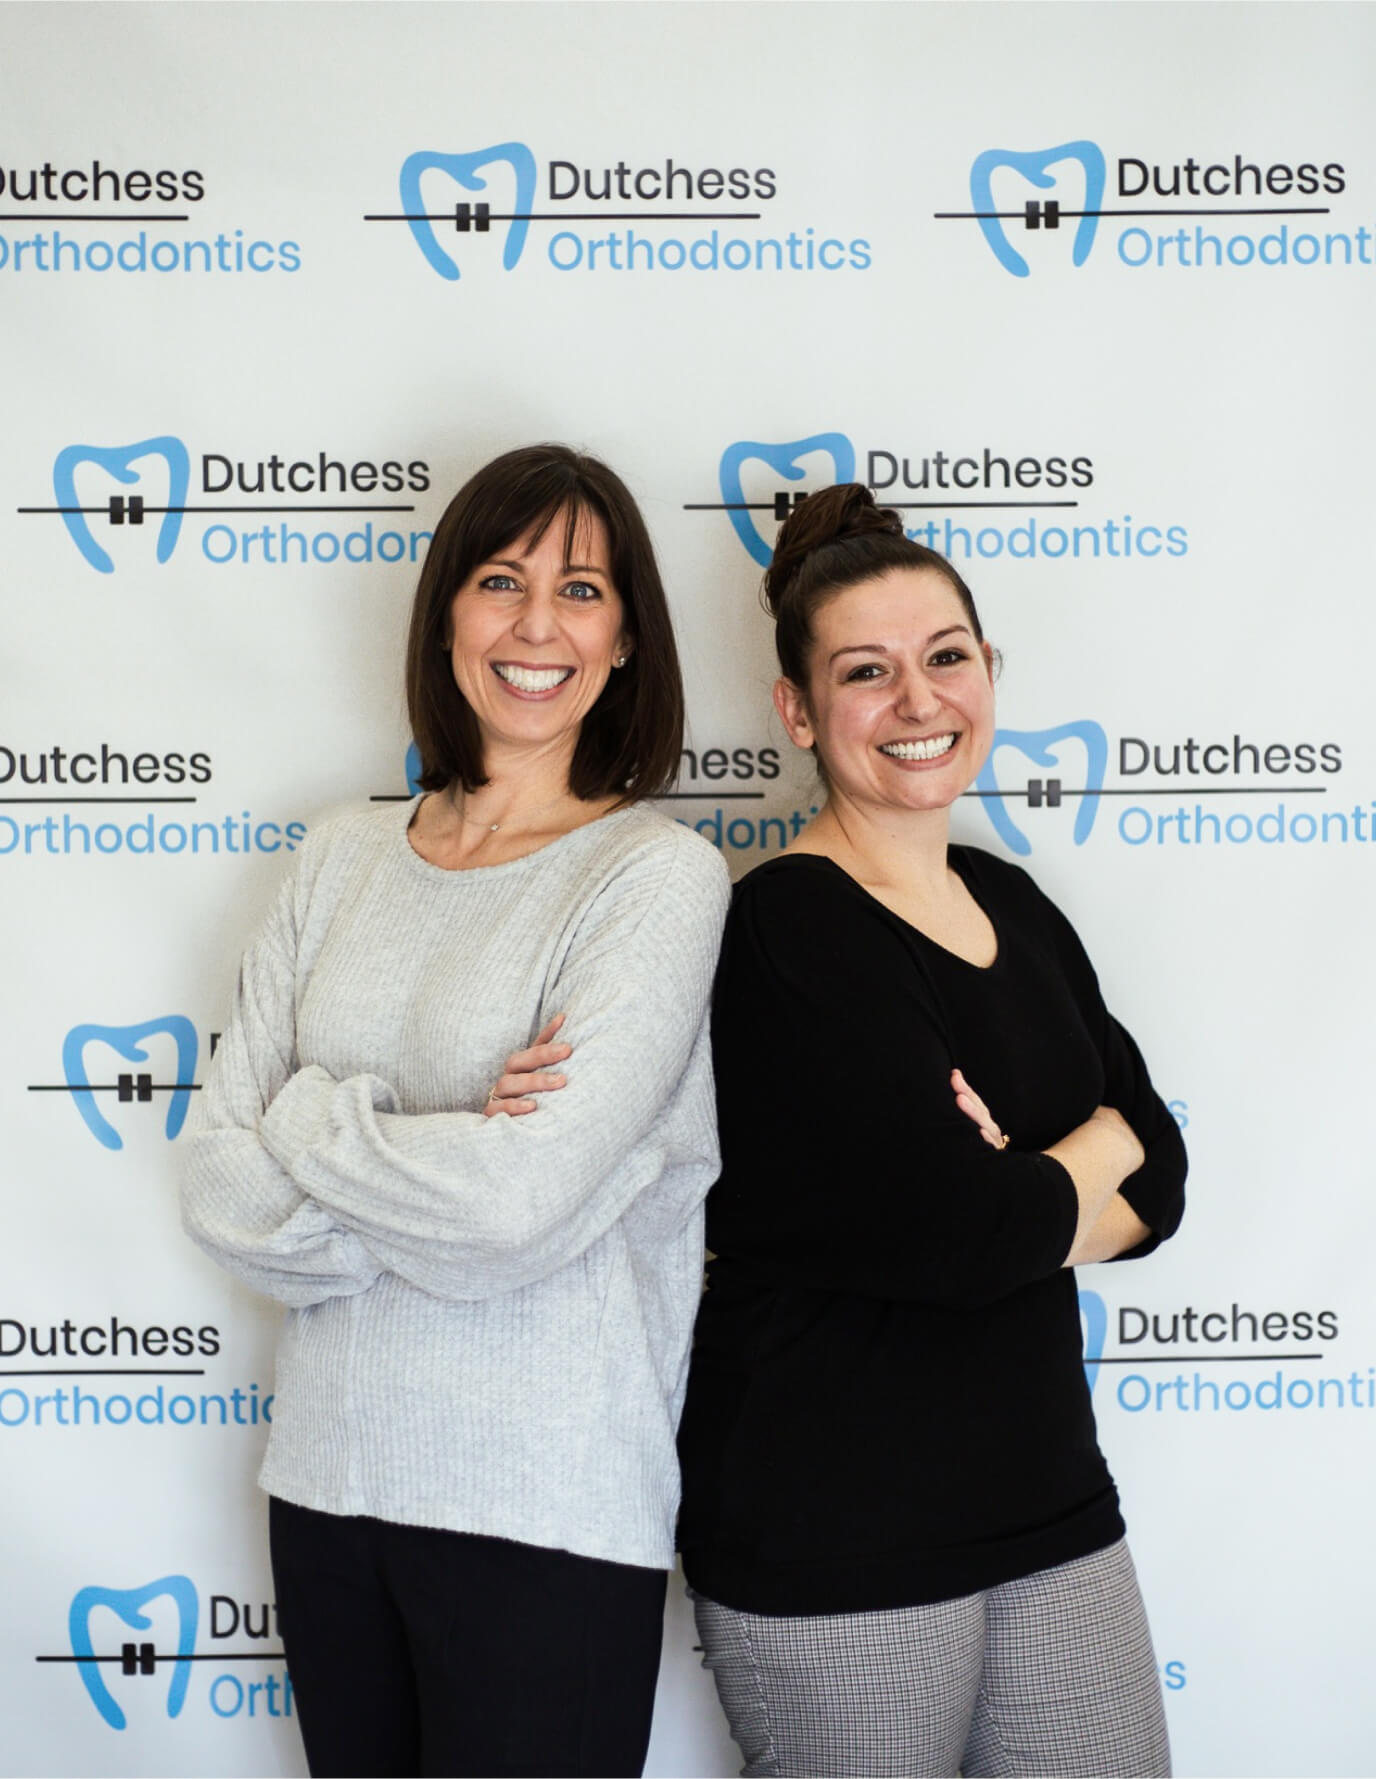 our orthodontists